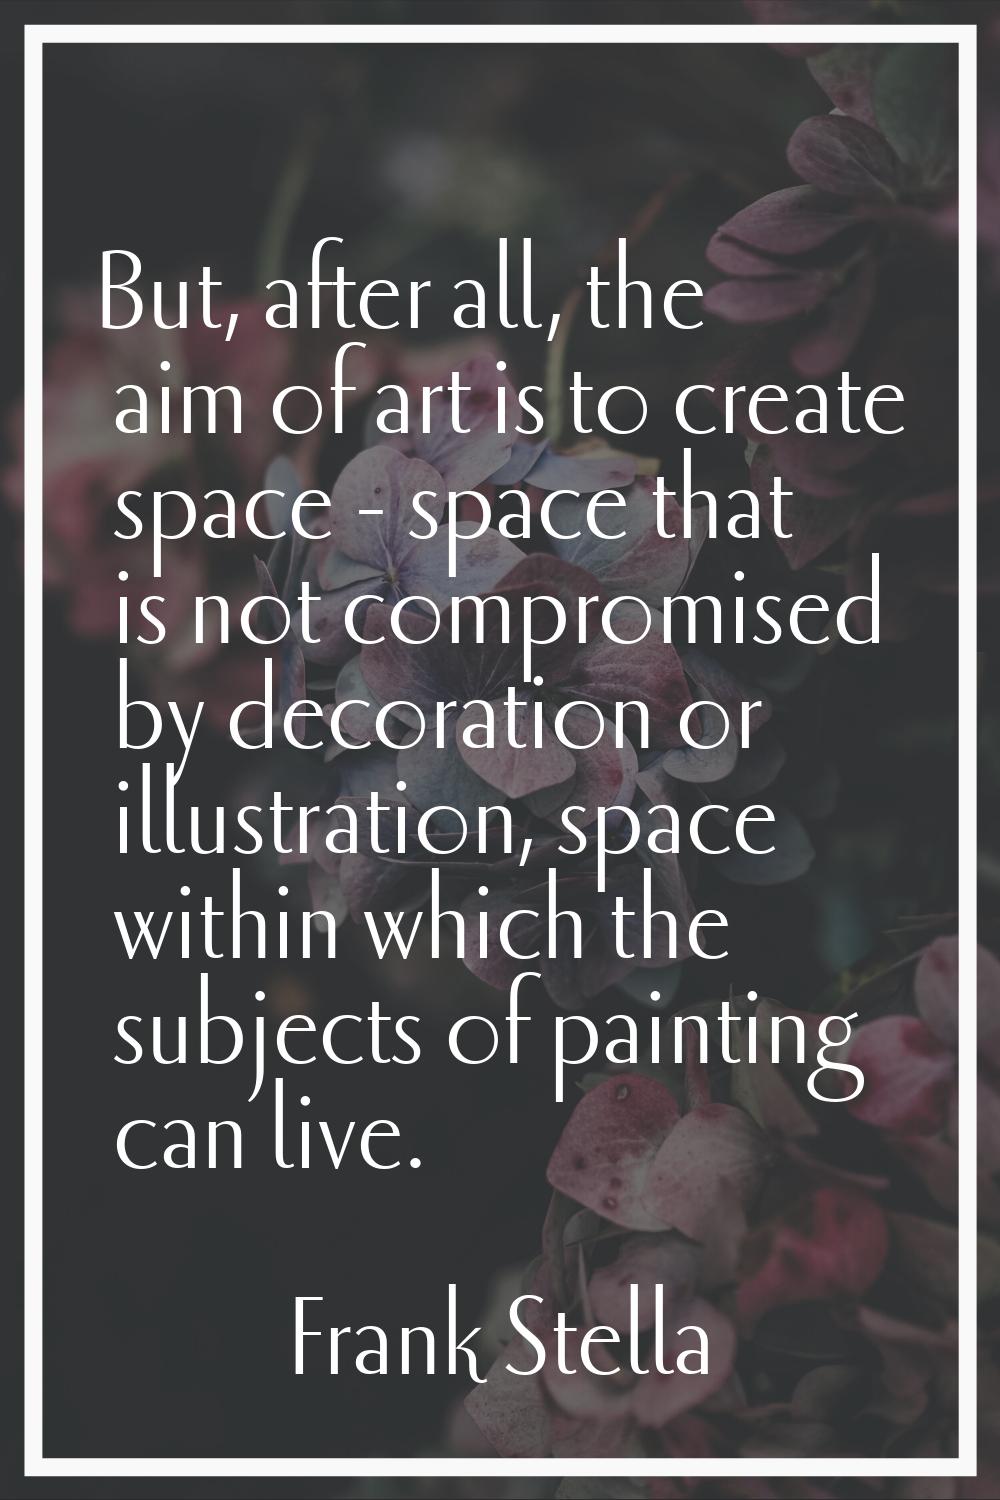 But, after all, the aim of art is to create space - space that is not compromised by decoration or 